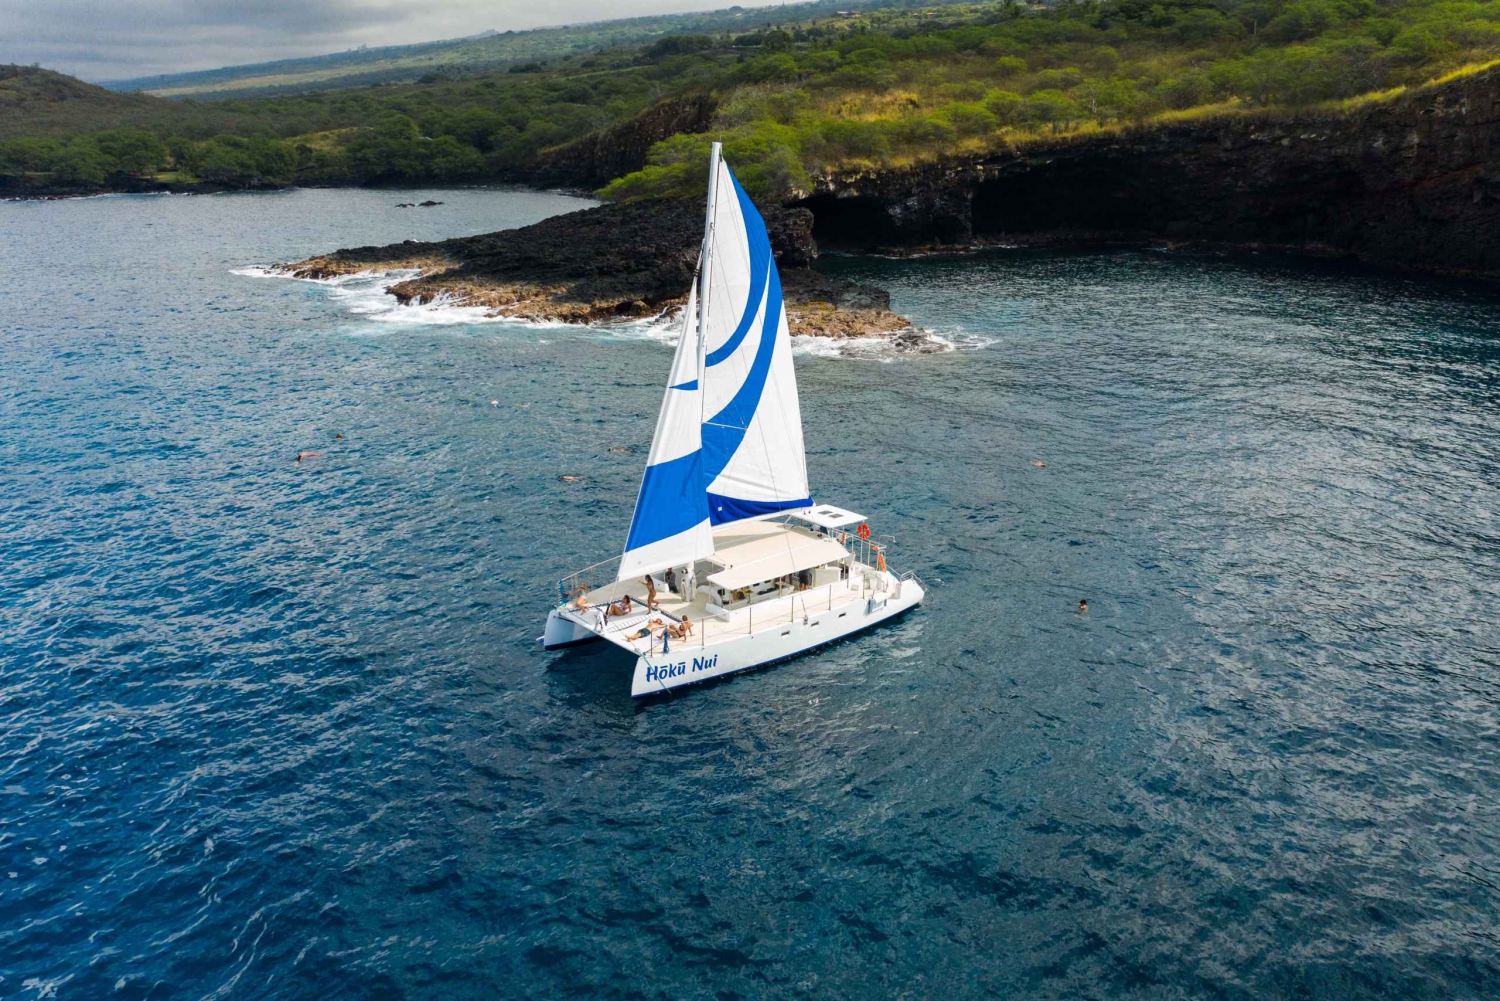 Big Island: Morning Snorkel Sail to Captain Cook's Monument